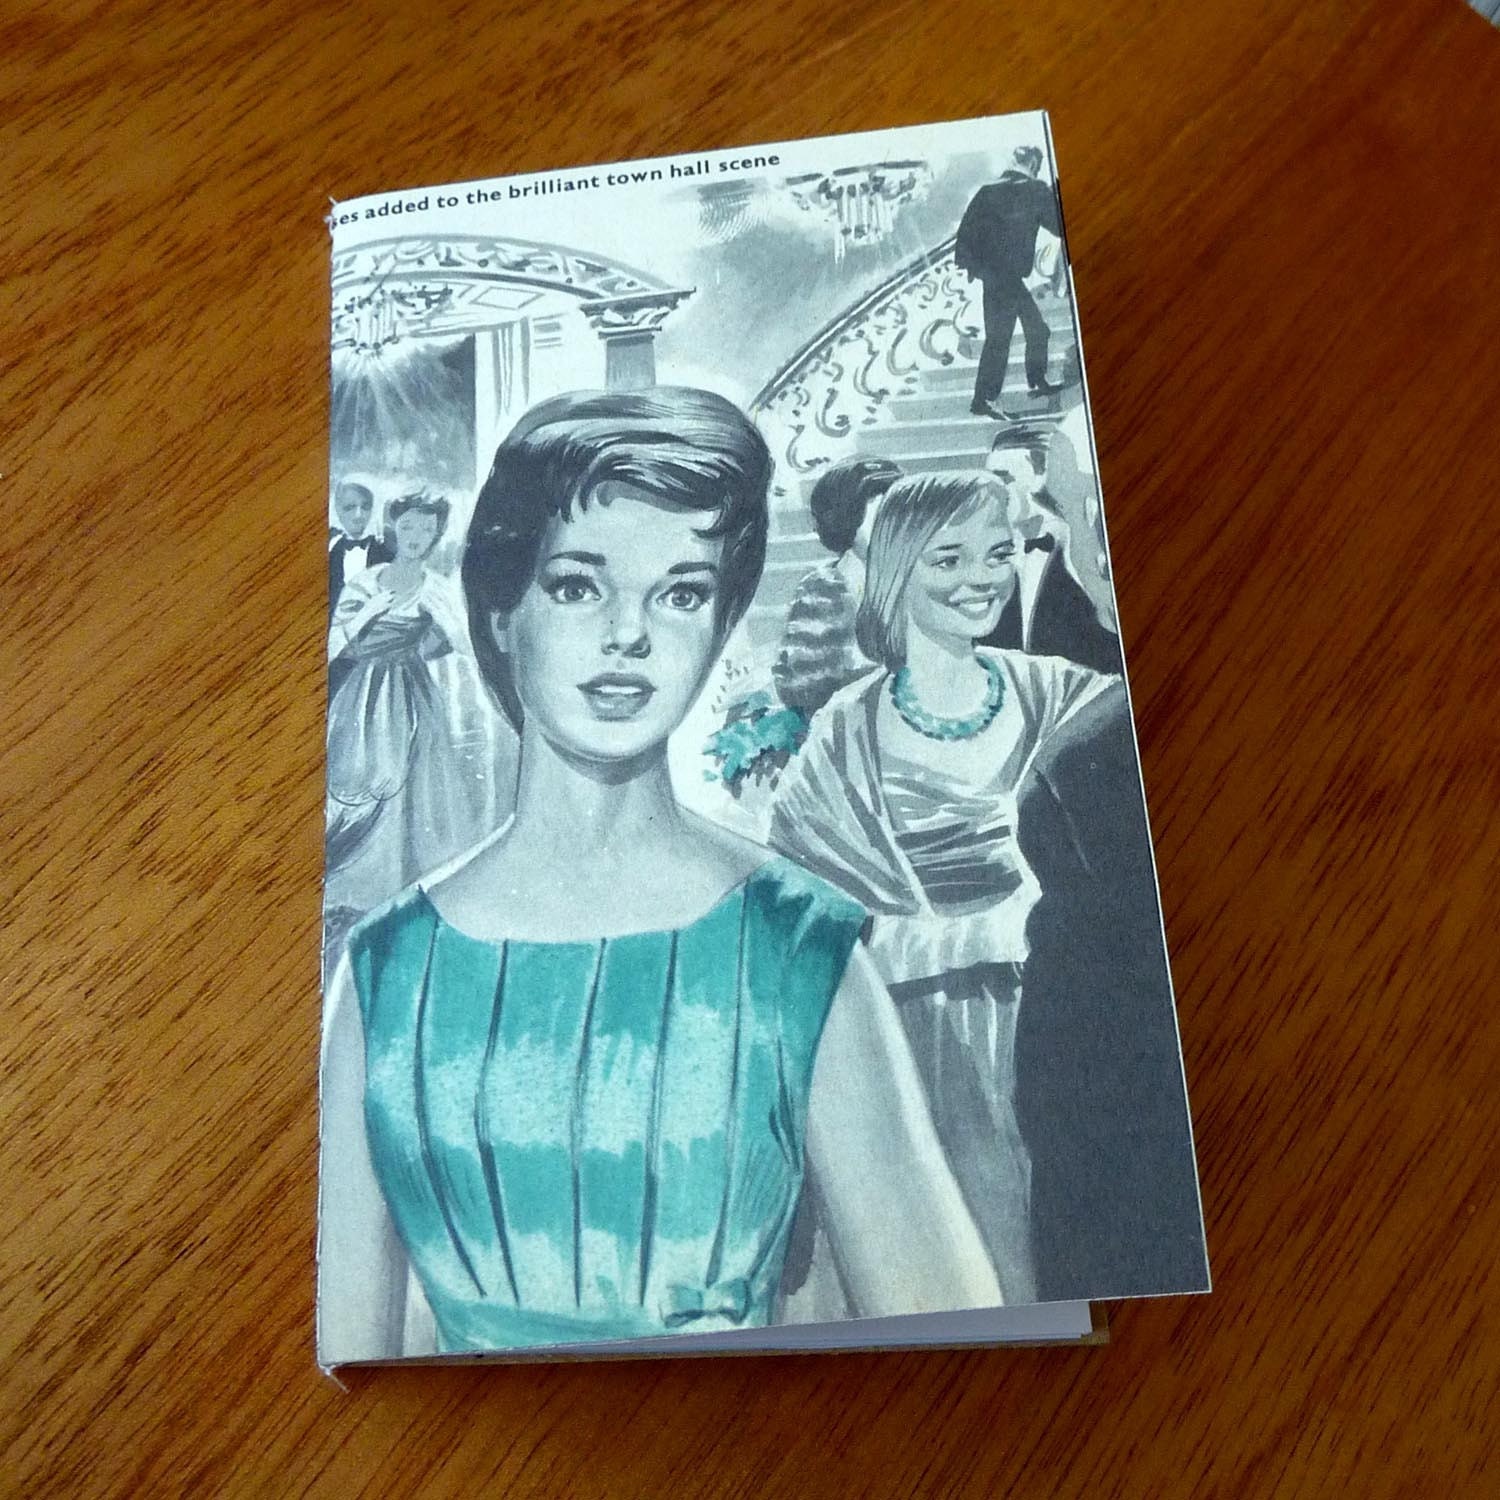 Cora at the Ball -  Handmade  UpCycled  Moleskine-style notebook